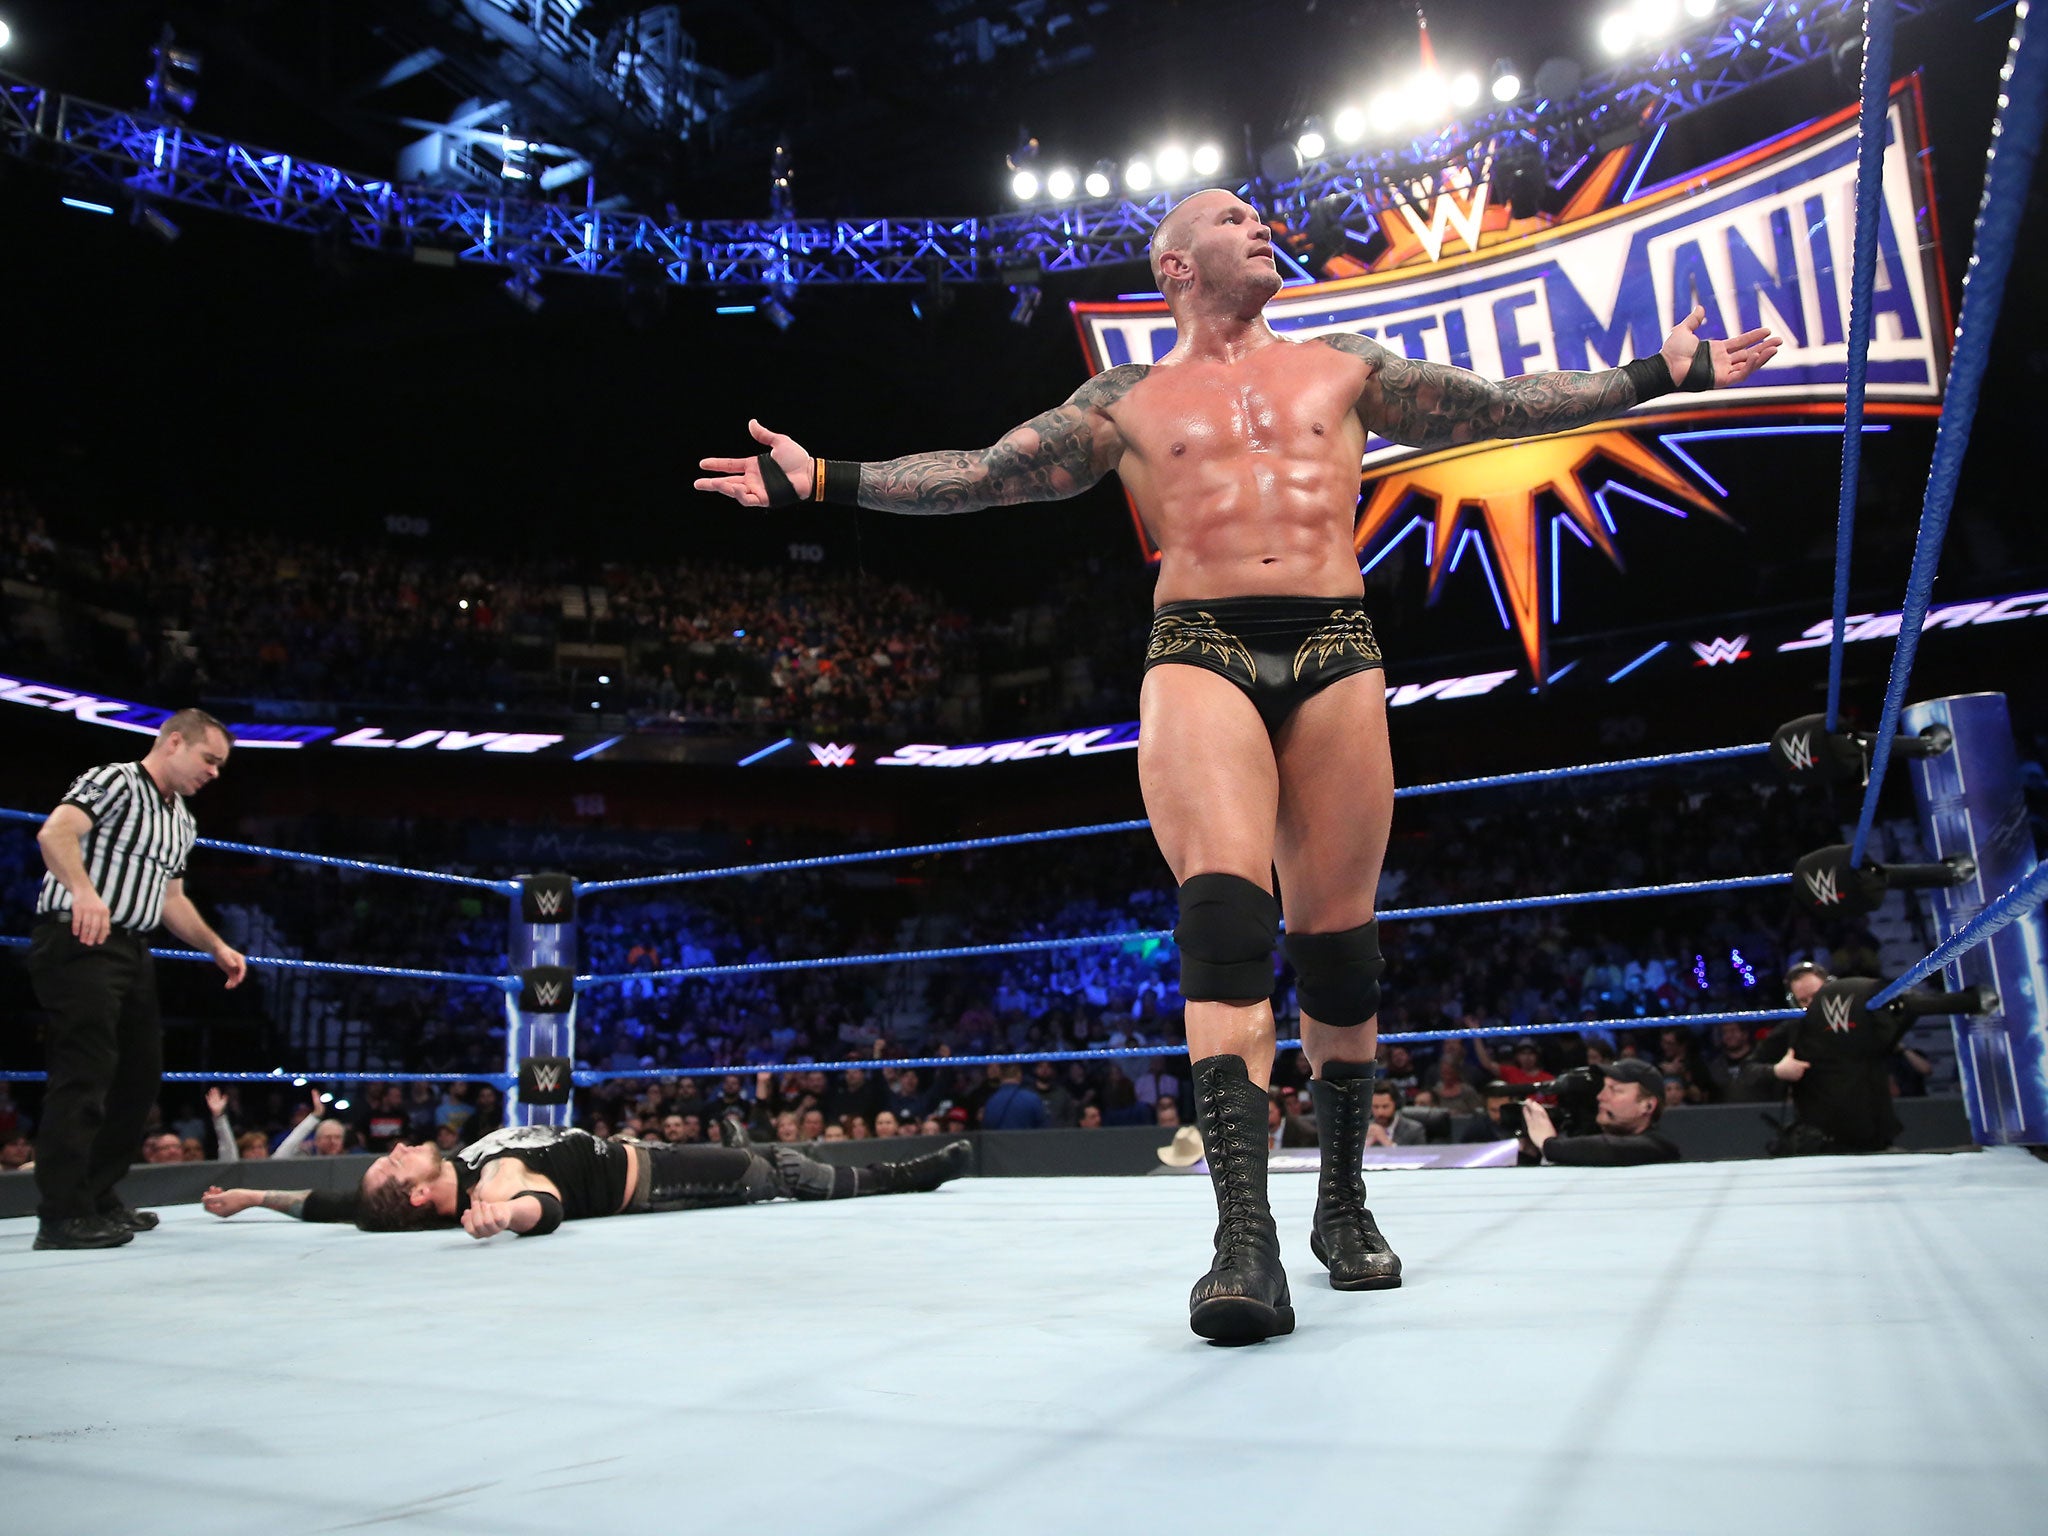 Randy Orton takes on Bray Wyatt after winning the Royal Rumble and turning on his partner